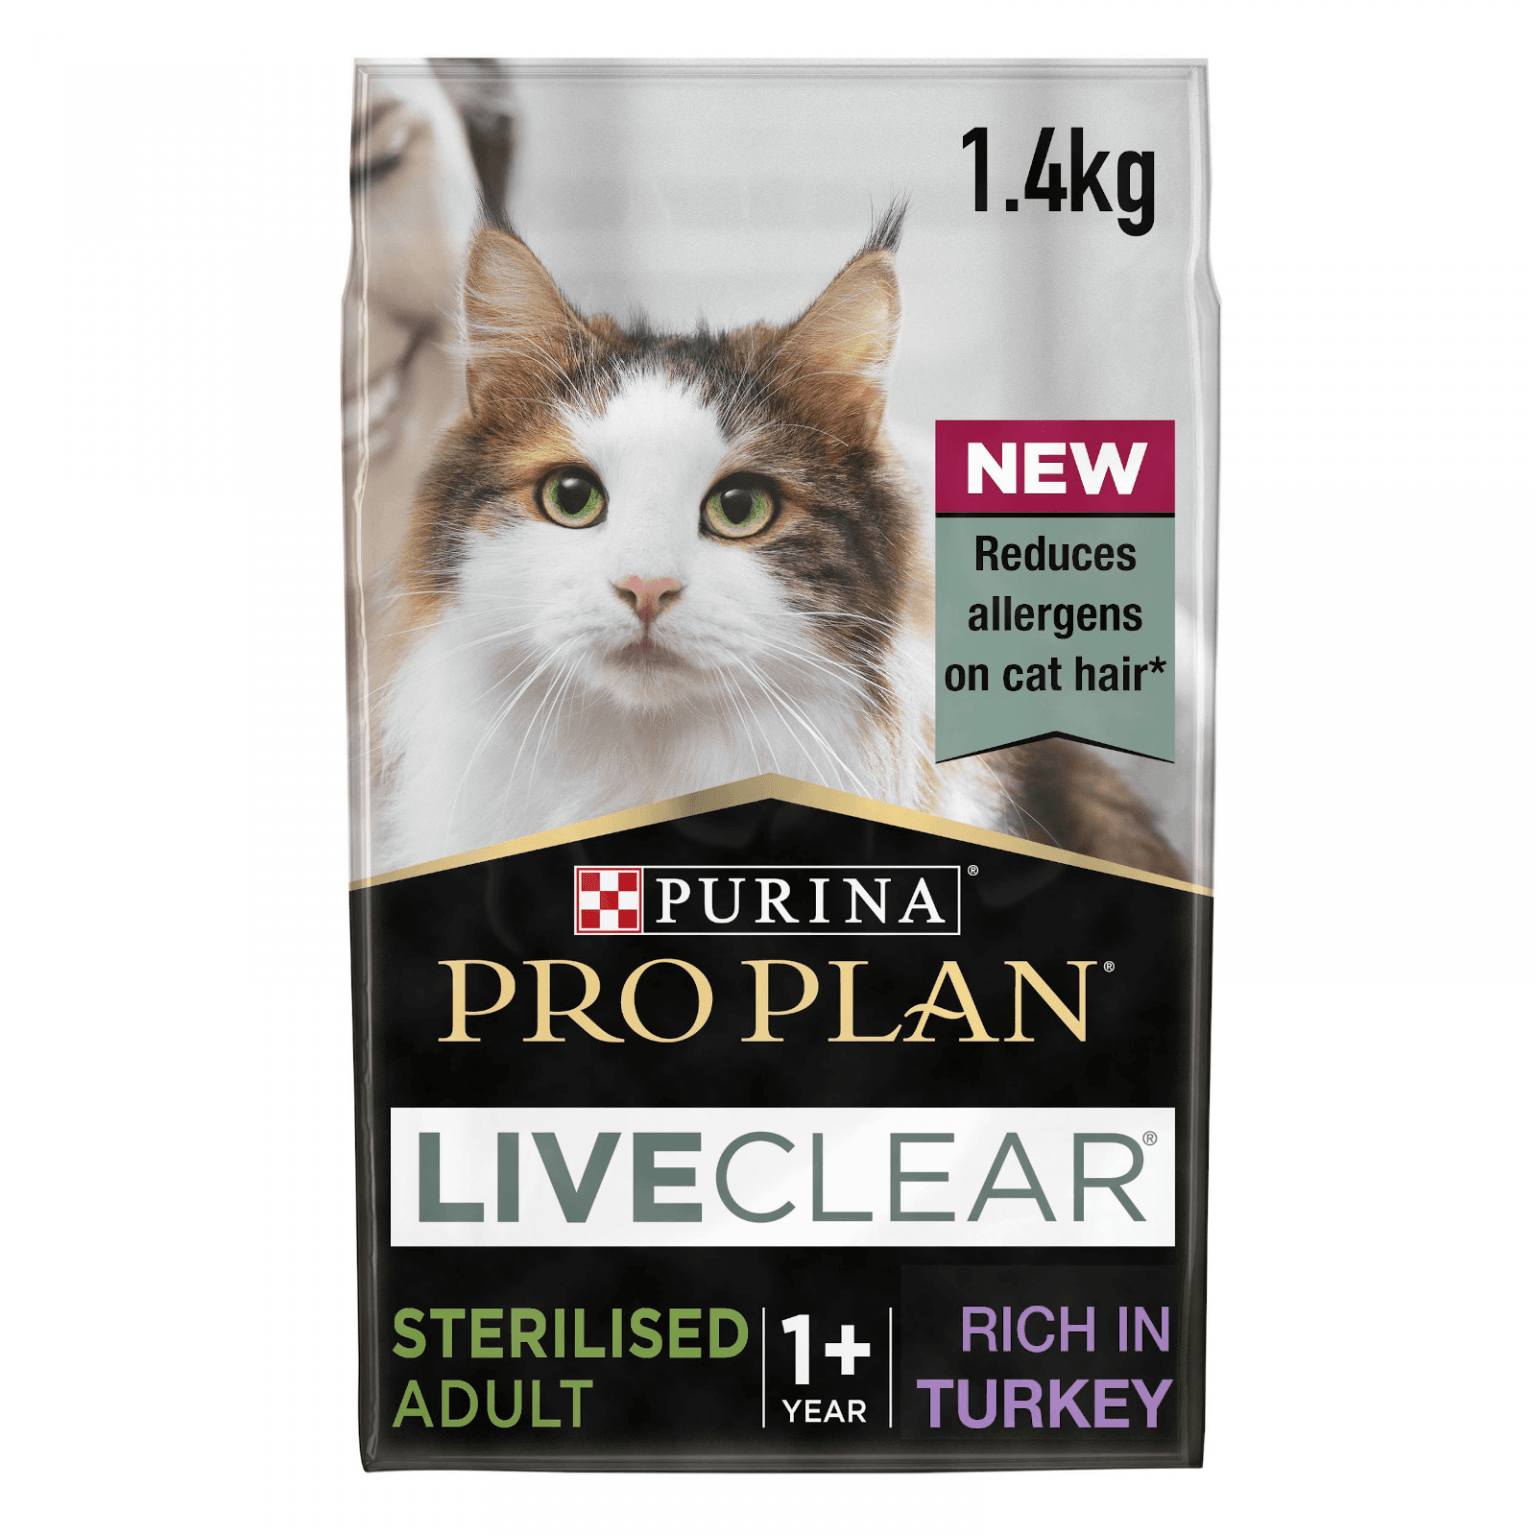 Pro Plan Live Clear from Purina Allergen reducing food CatsKidsChaos